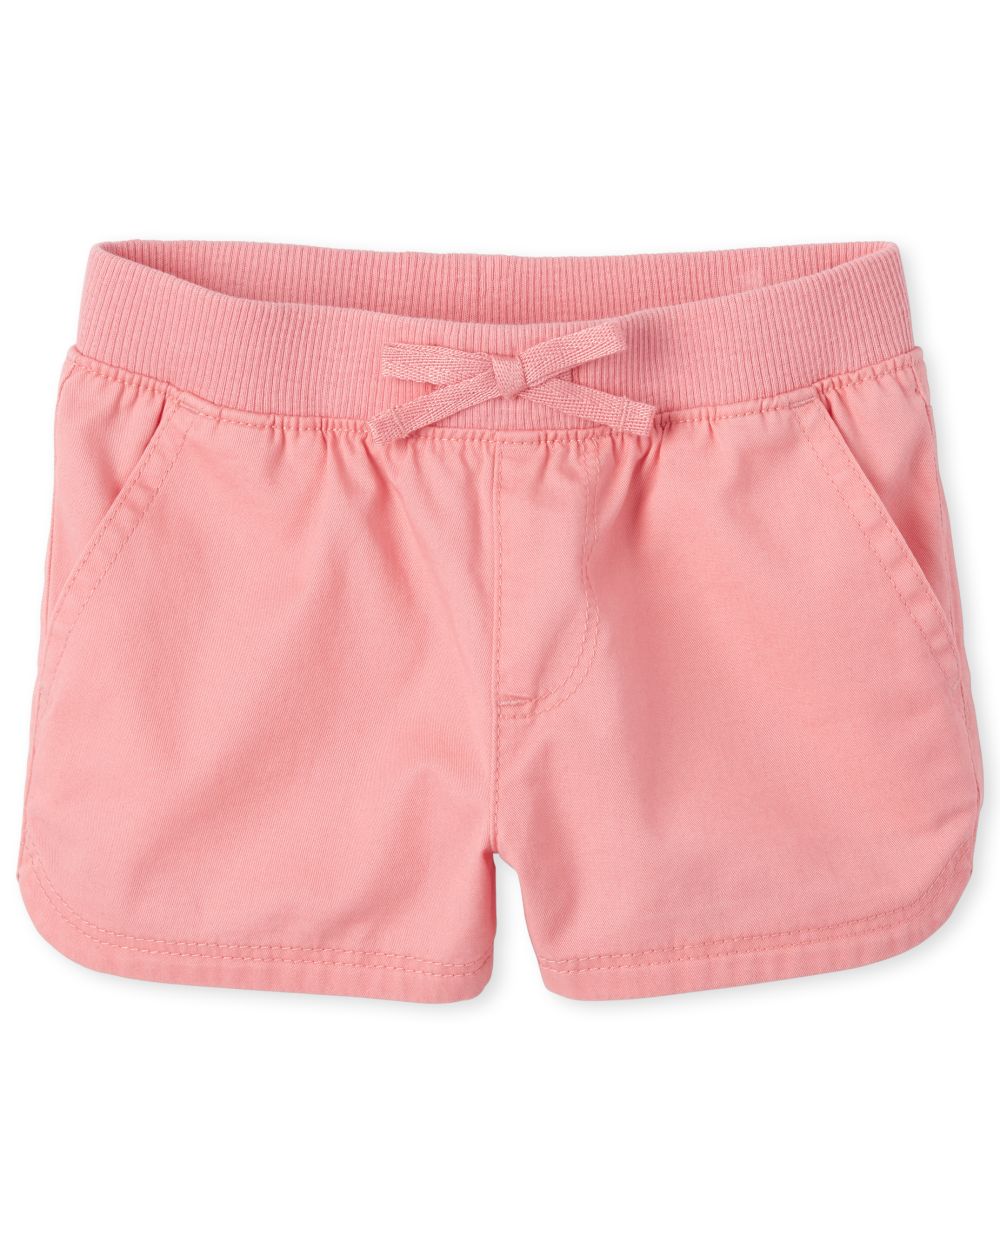 Baby And Toddler Girls Knit Waistband Woven Pull On Shorts